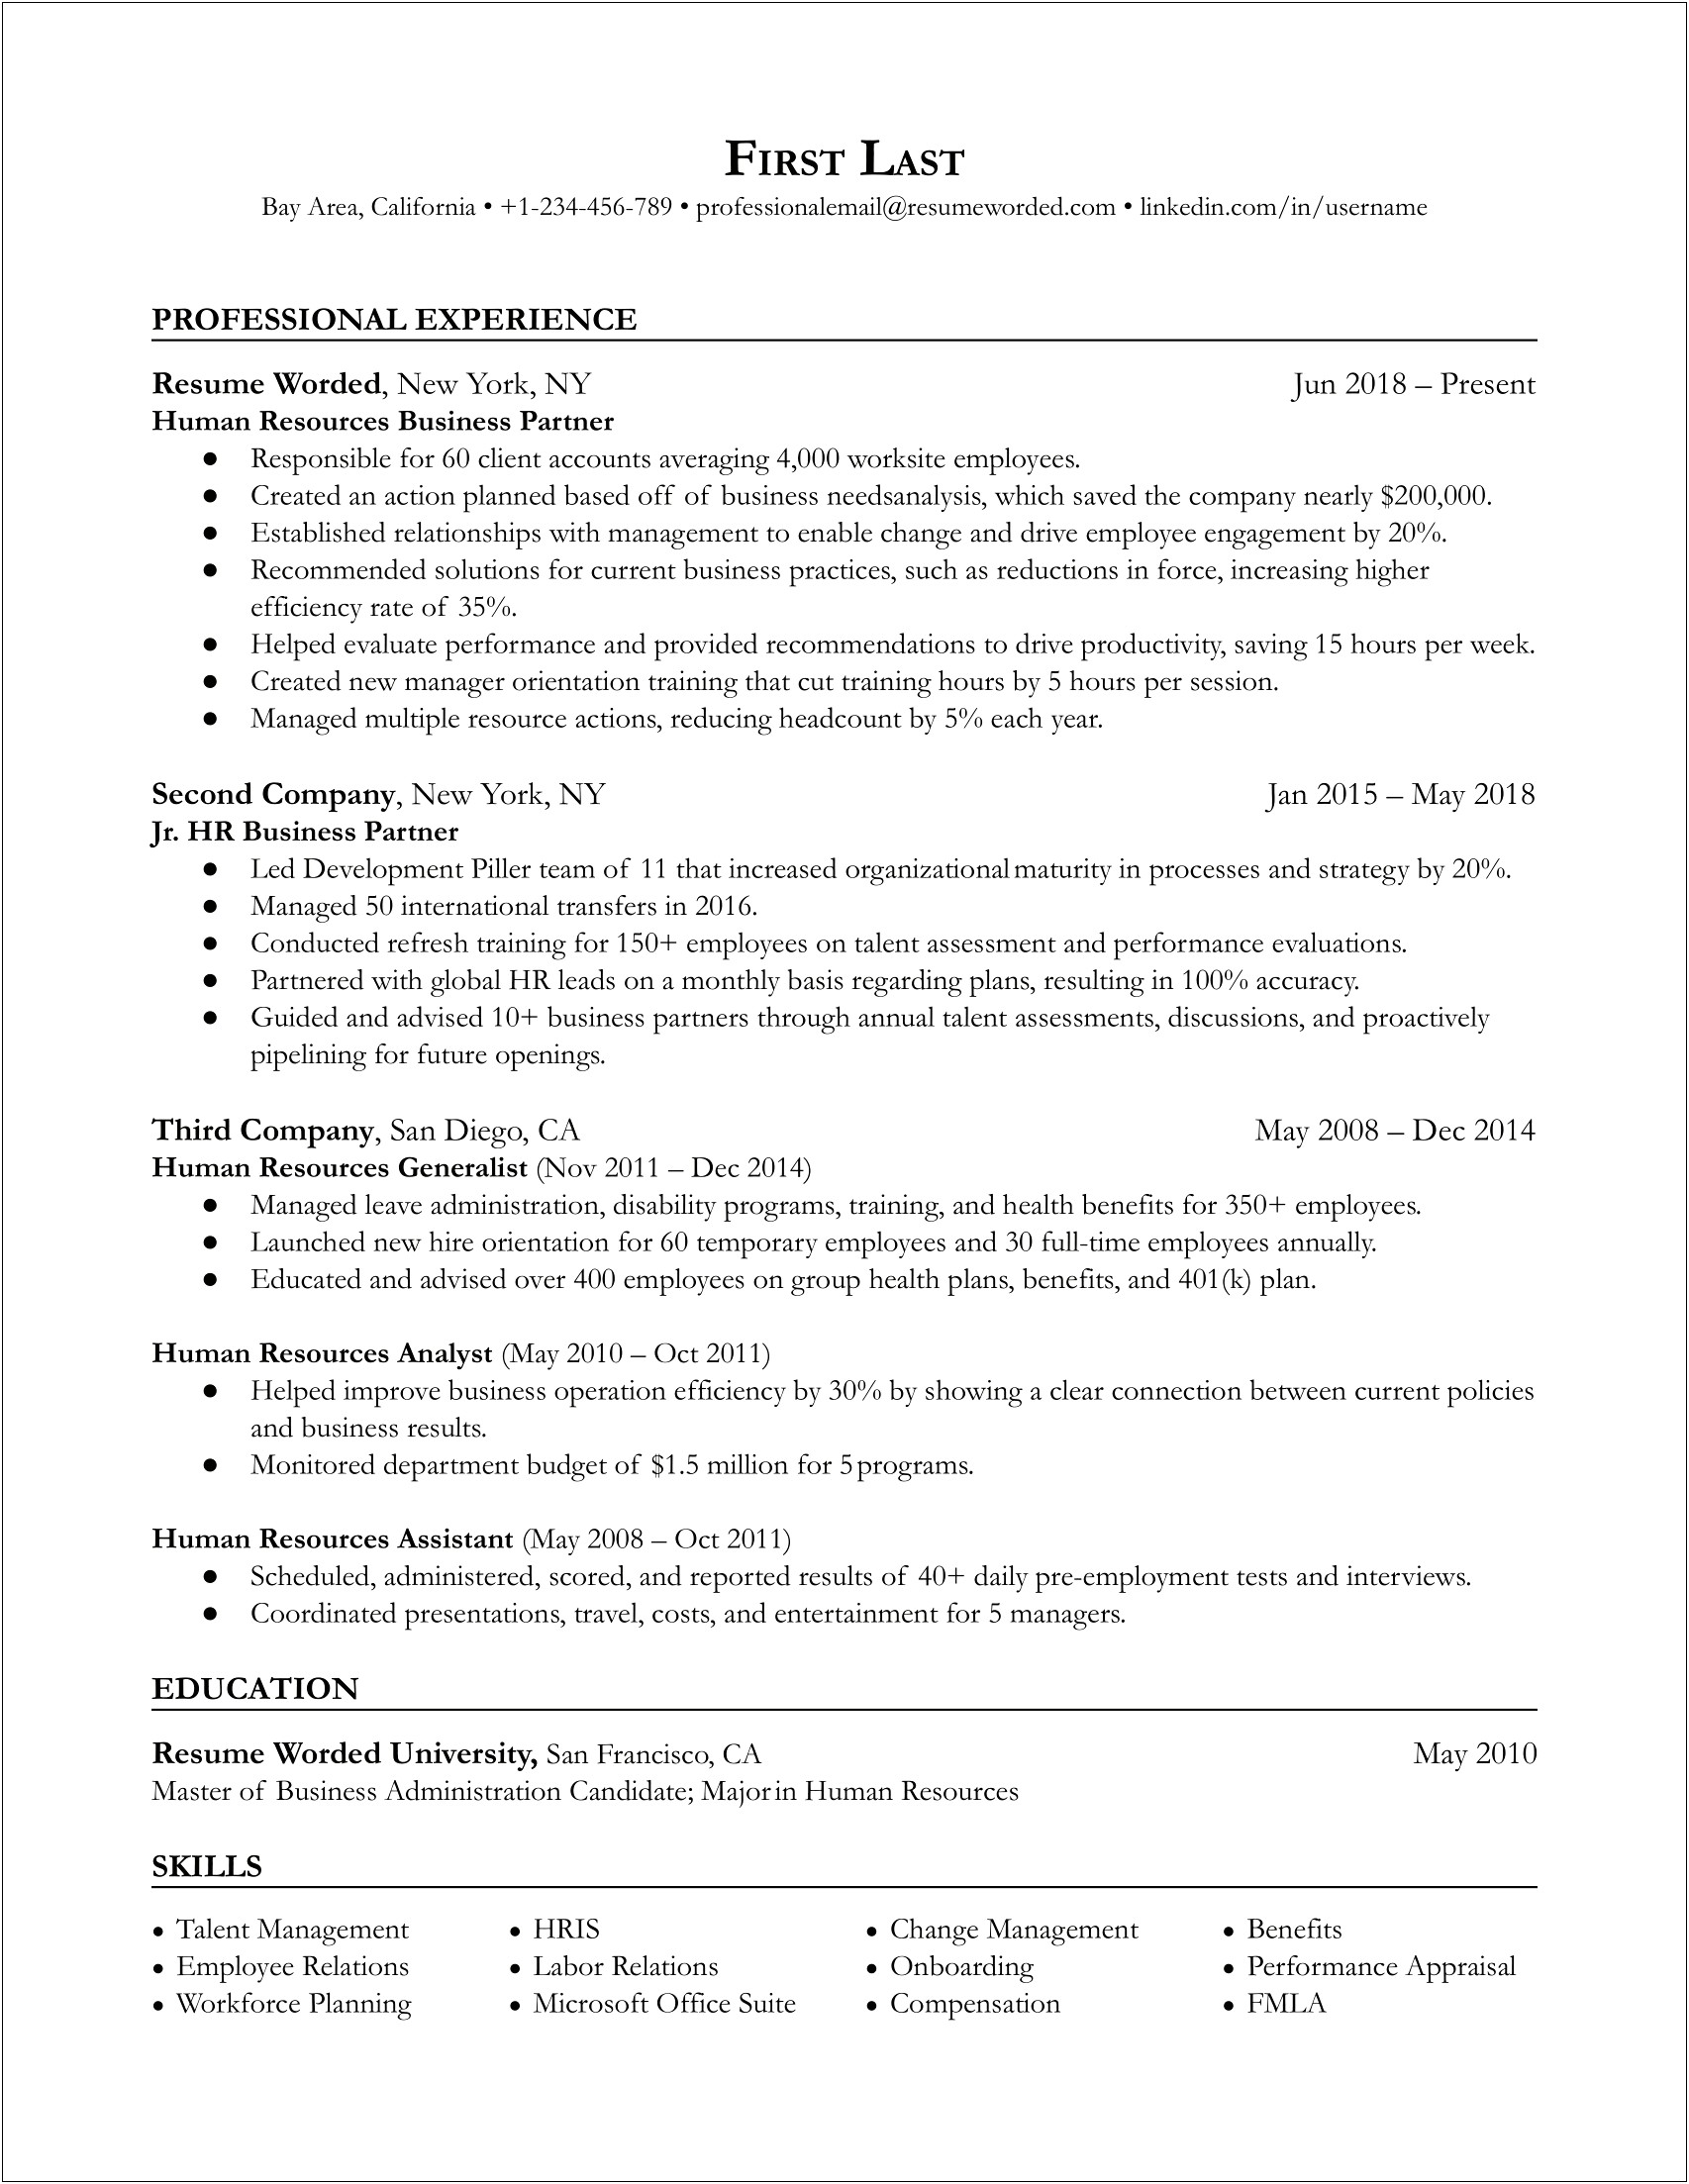 Human Resource Specialist Resume Objective